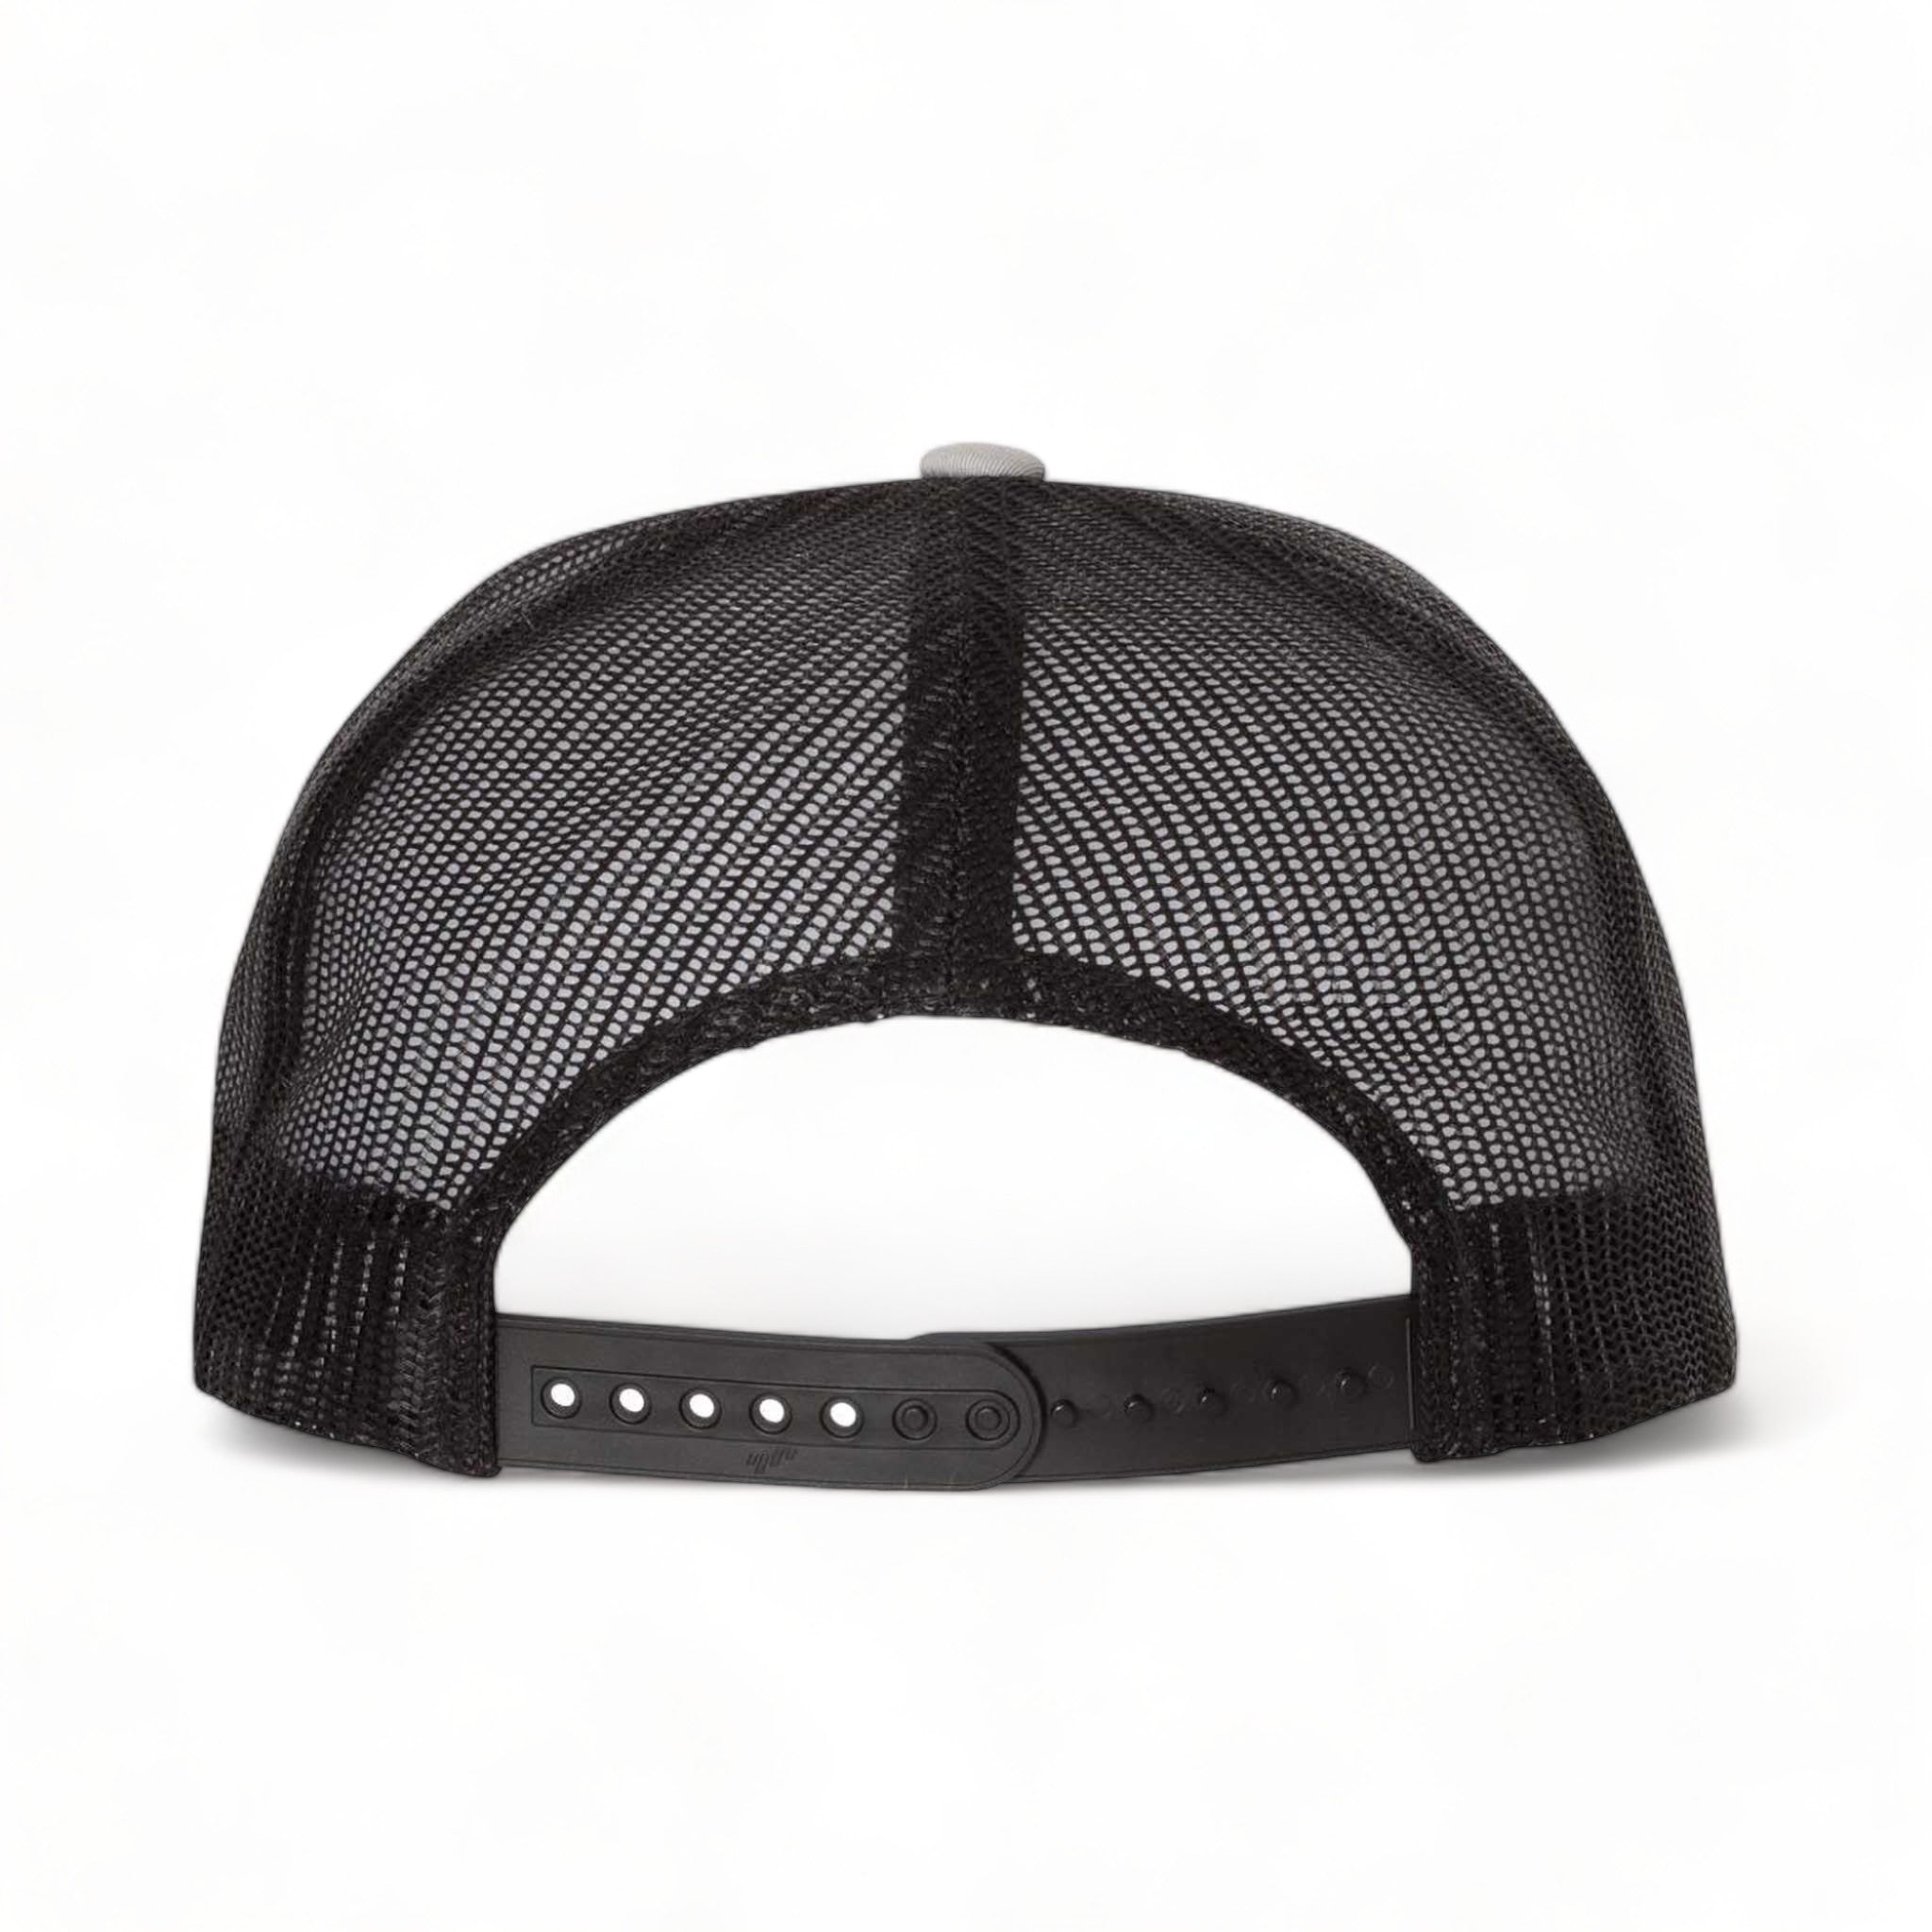 Back view of YP Classics 6006 custom hat in silver and black